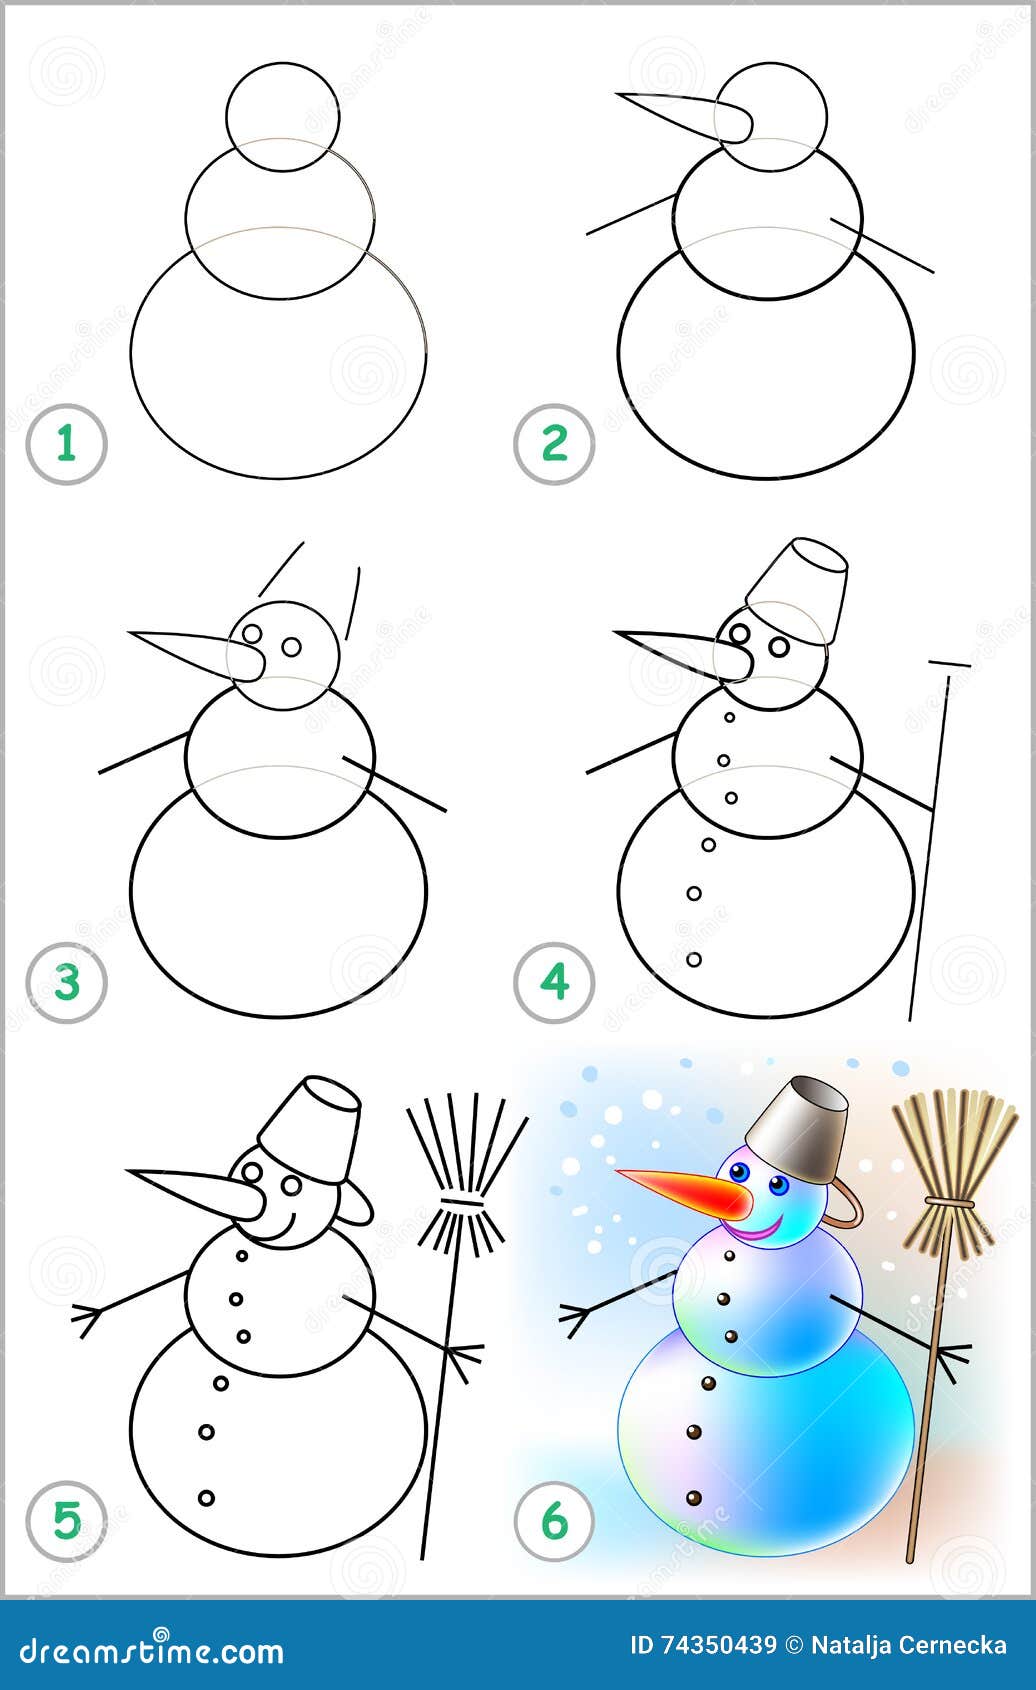 Snowman Drawing - How To Draw A Snowman Step By Step